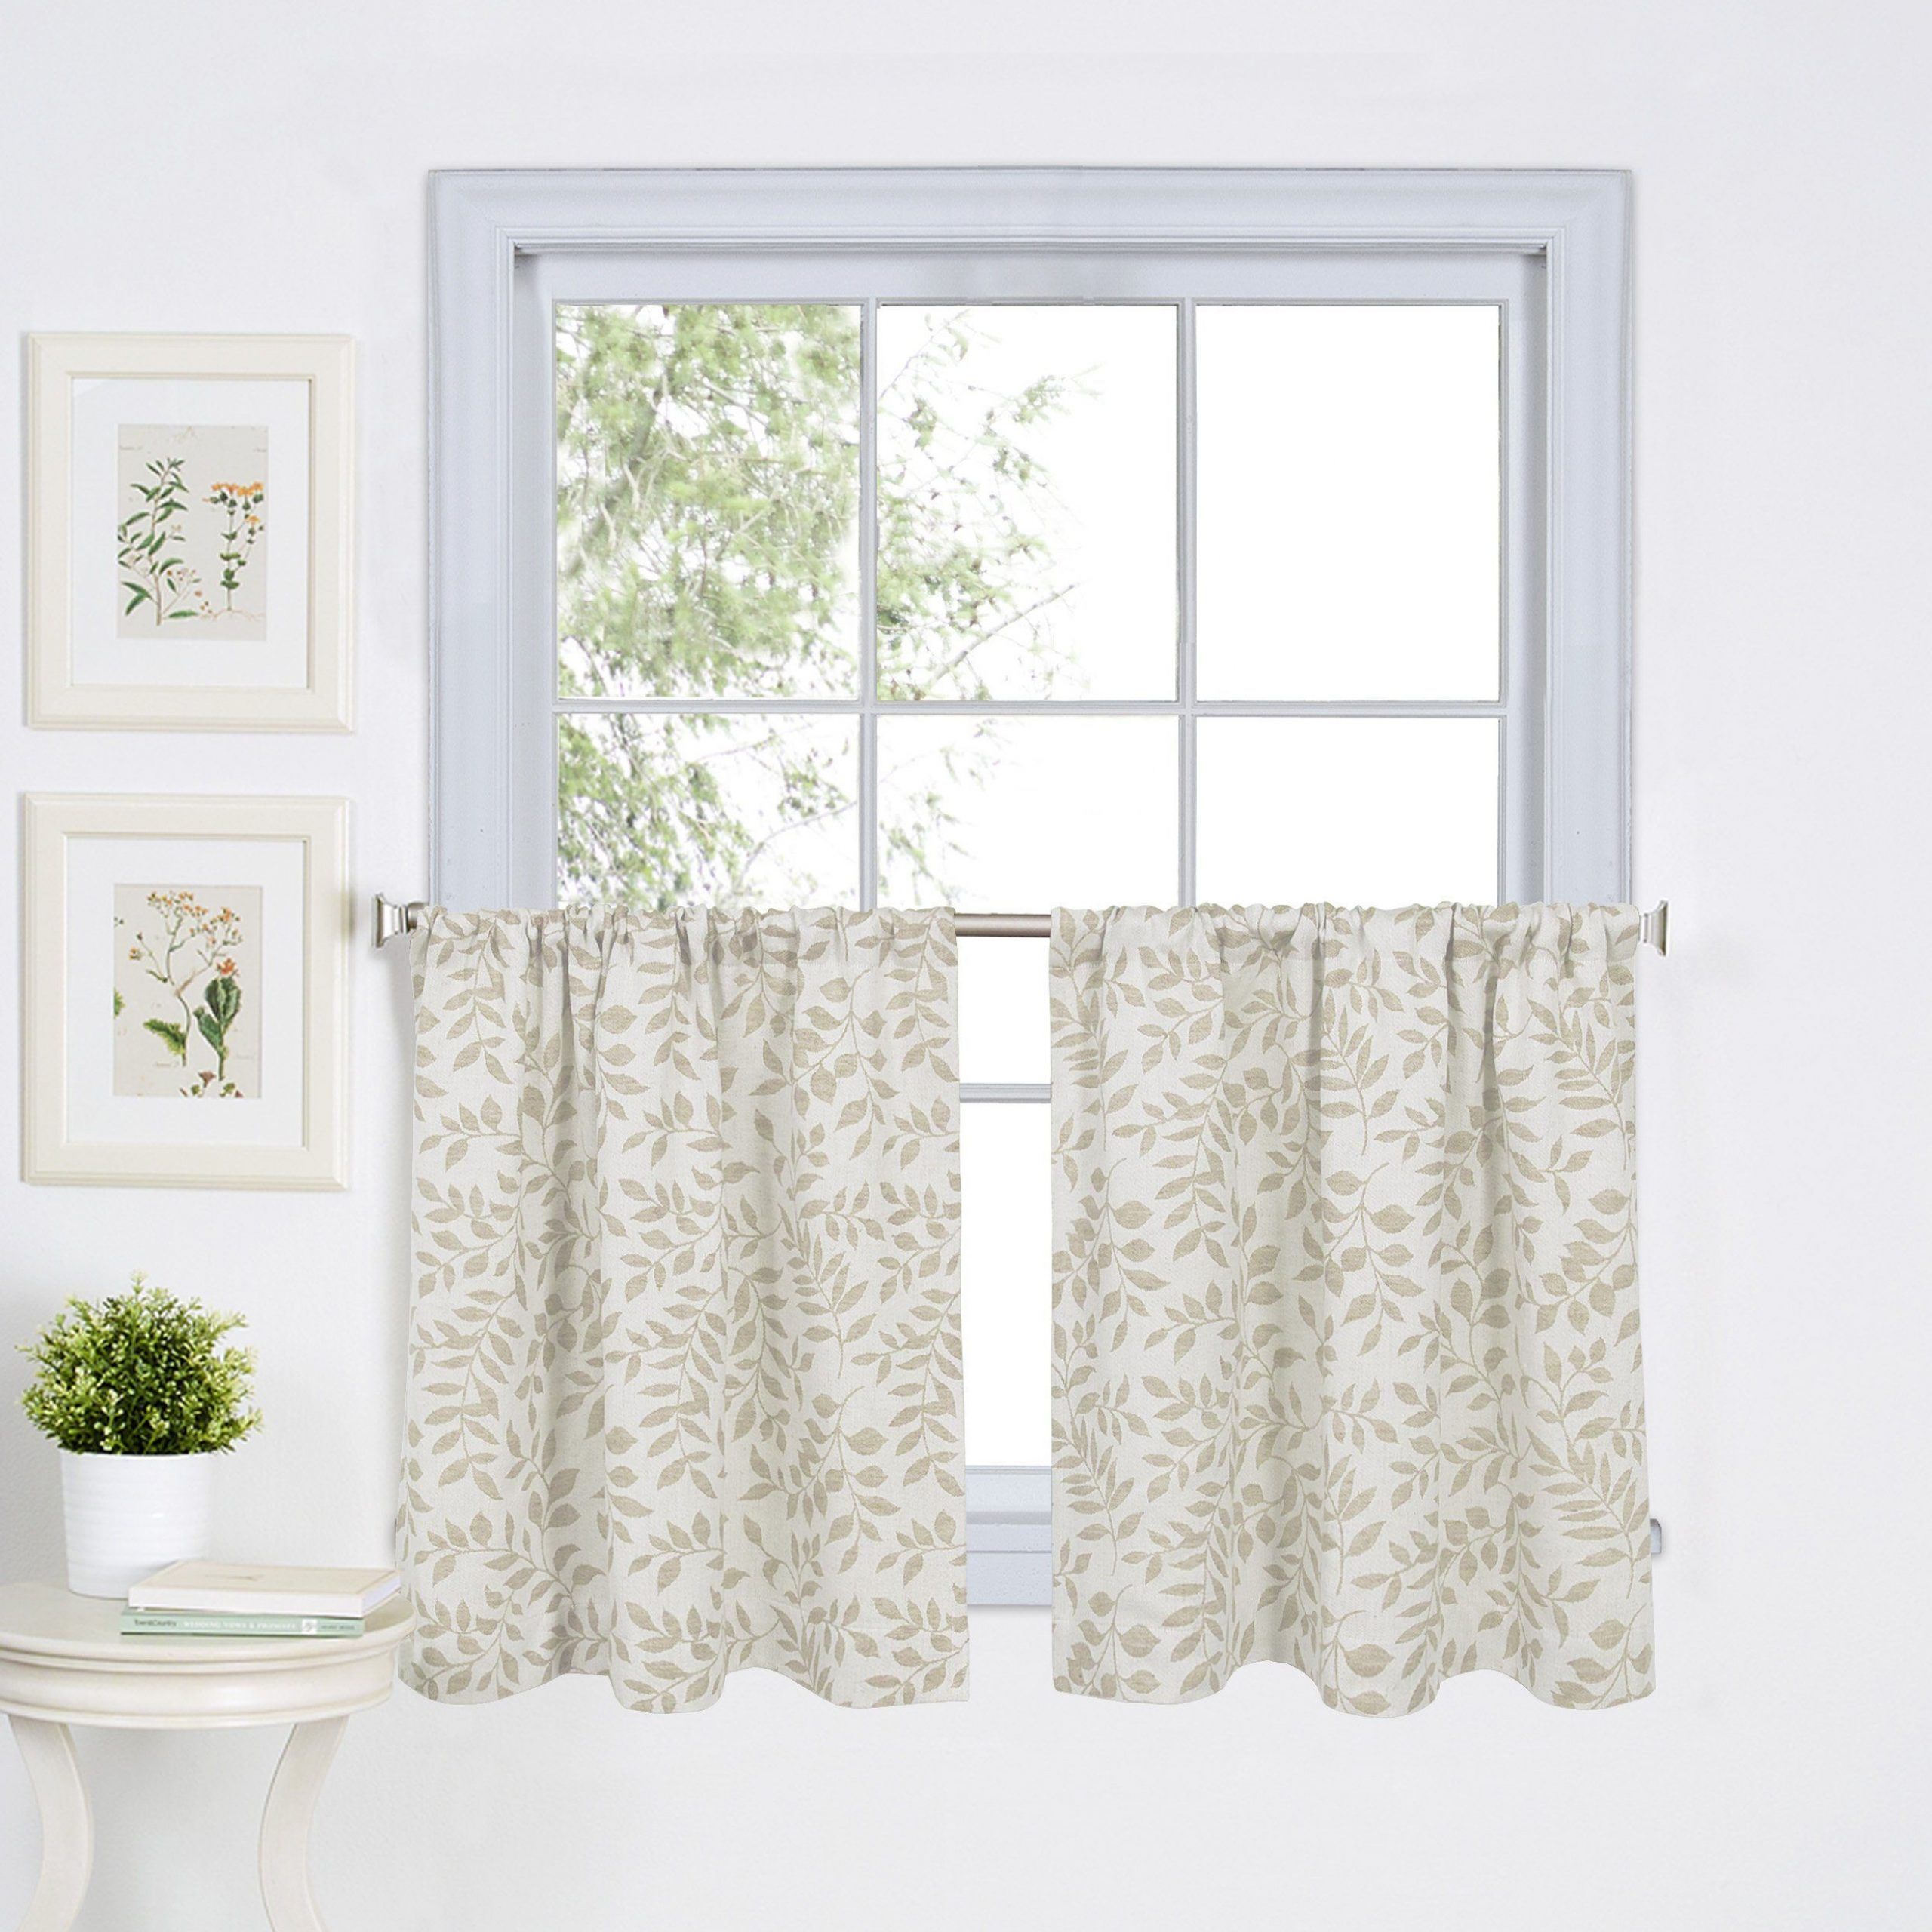 Serene Rod Pocket Window Tiers In 2019 | Products | Curtain Pertaining To Vertical Ruffled Waterfall Valances And Curtain Tiers (View 13 of 20)